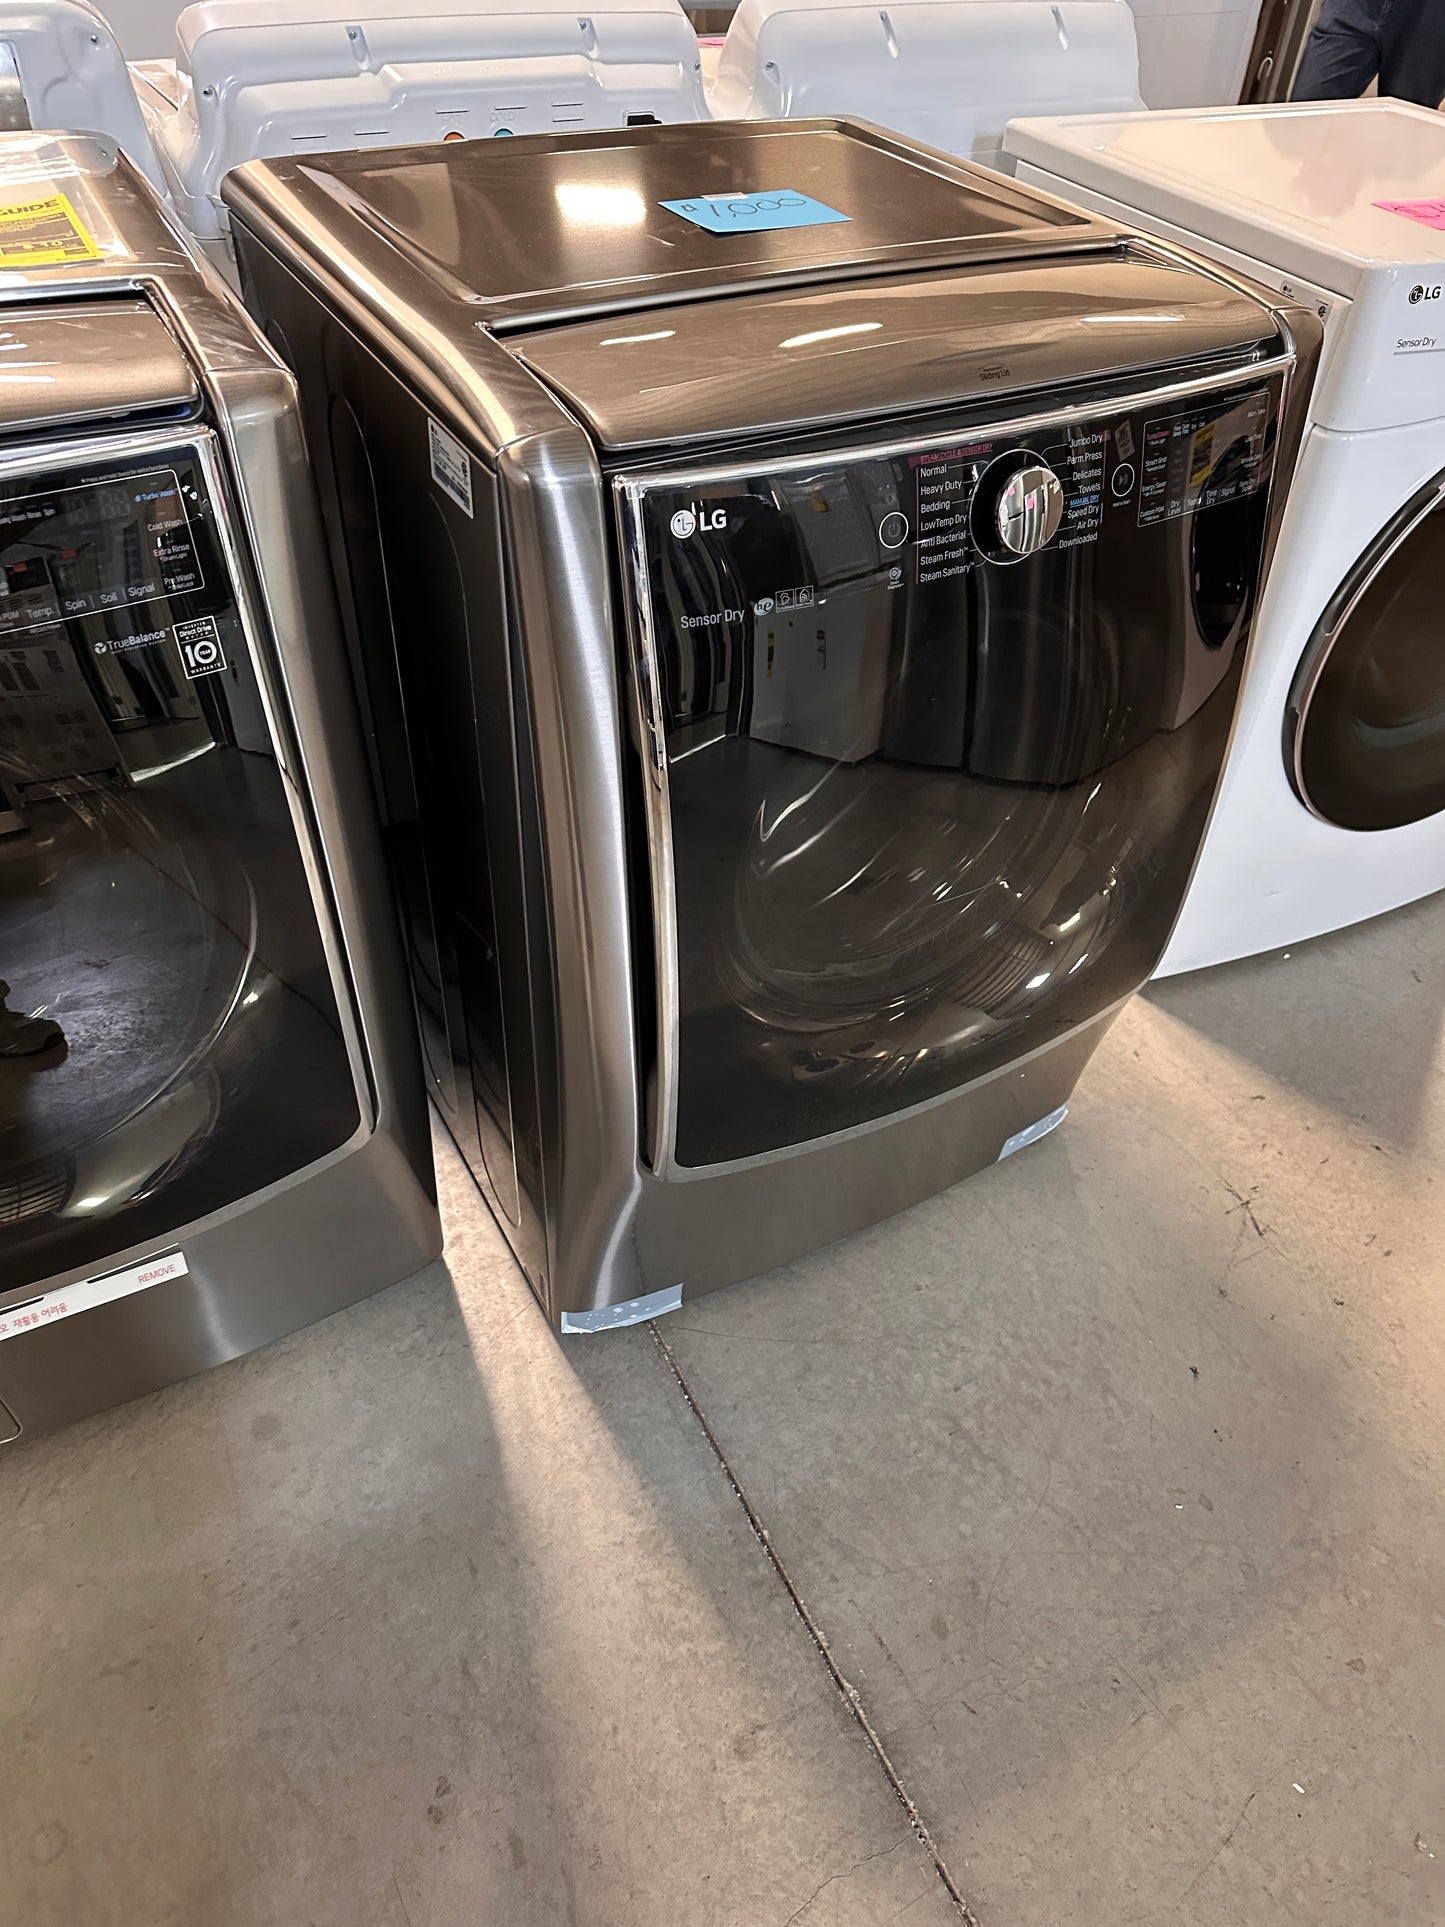 GREAT NEW SMART FRONT LOAD WASHER with STEAM and TURBOWASH - WAS12763